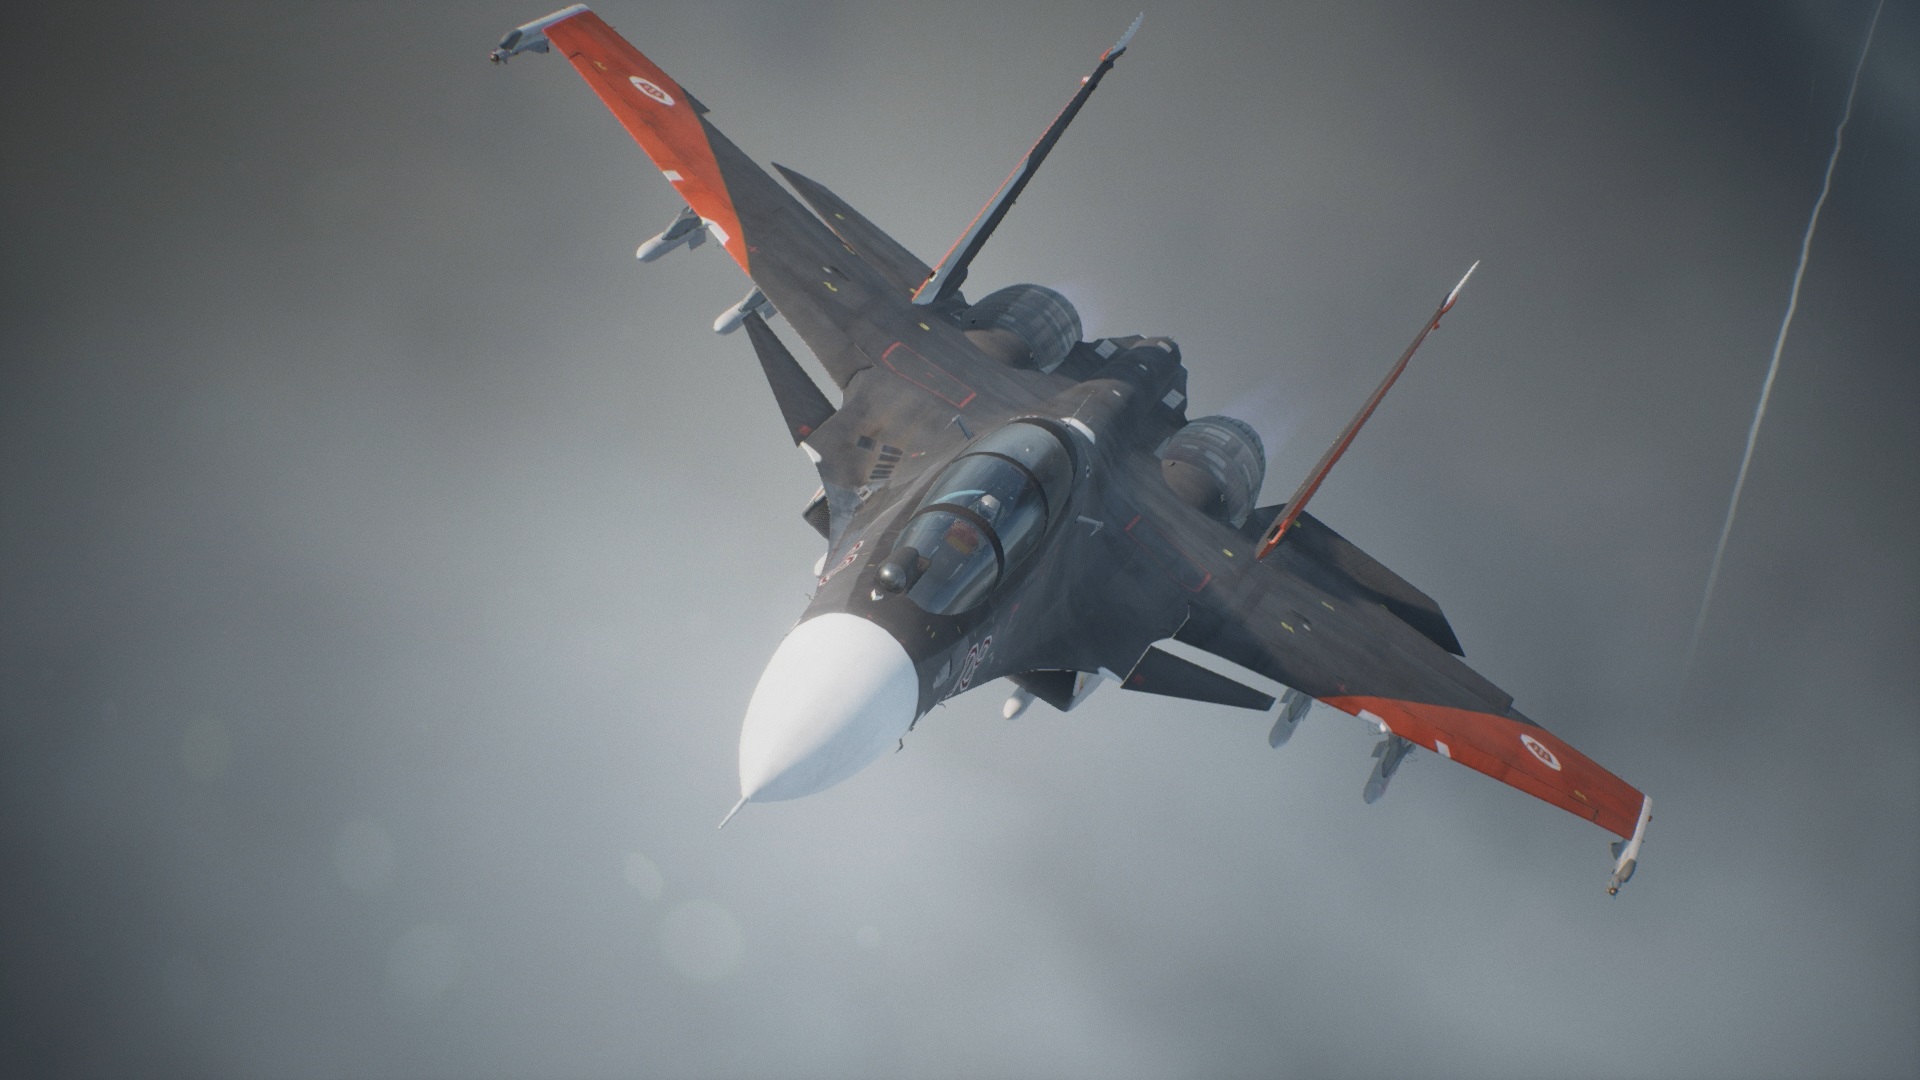 Ace Combat 7: Skies Unknown Launches January 2019 for Consoles, February for PC